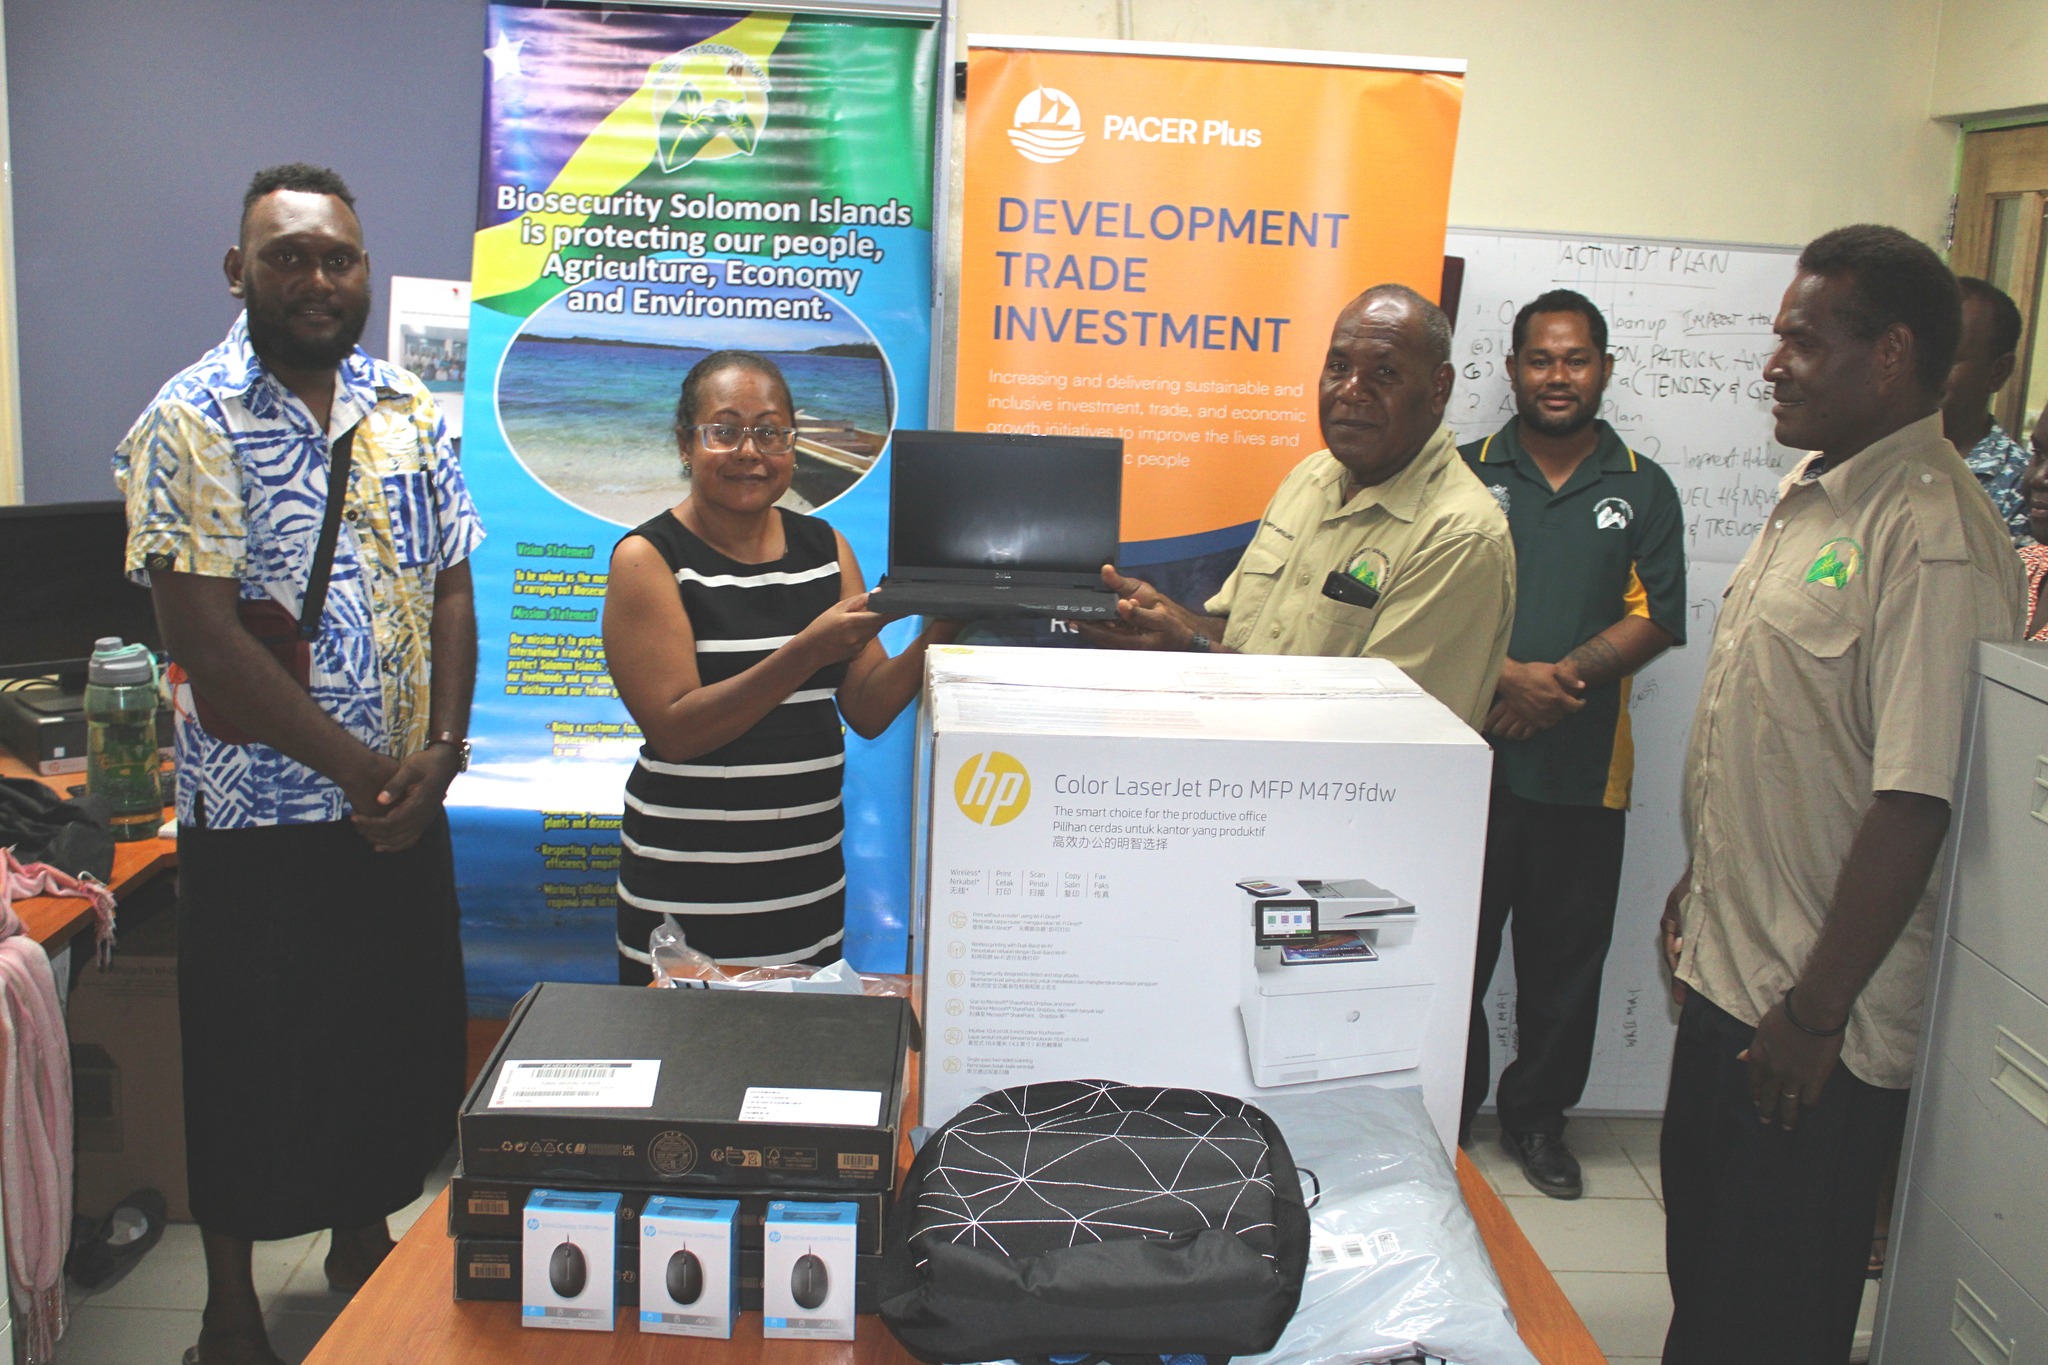 PACER Plus handover I.T Equipment to assist Biosecurity in the implementation of ePhyto in Solomon Islands.